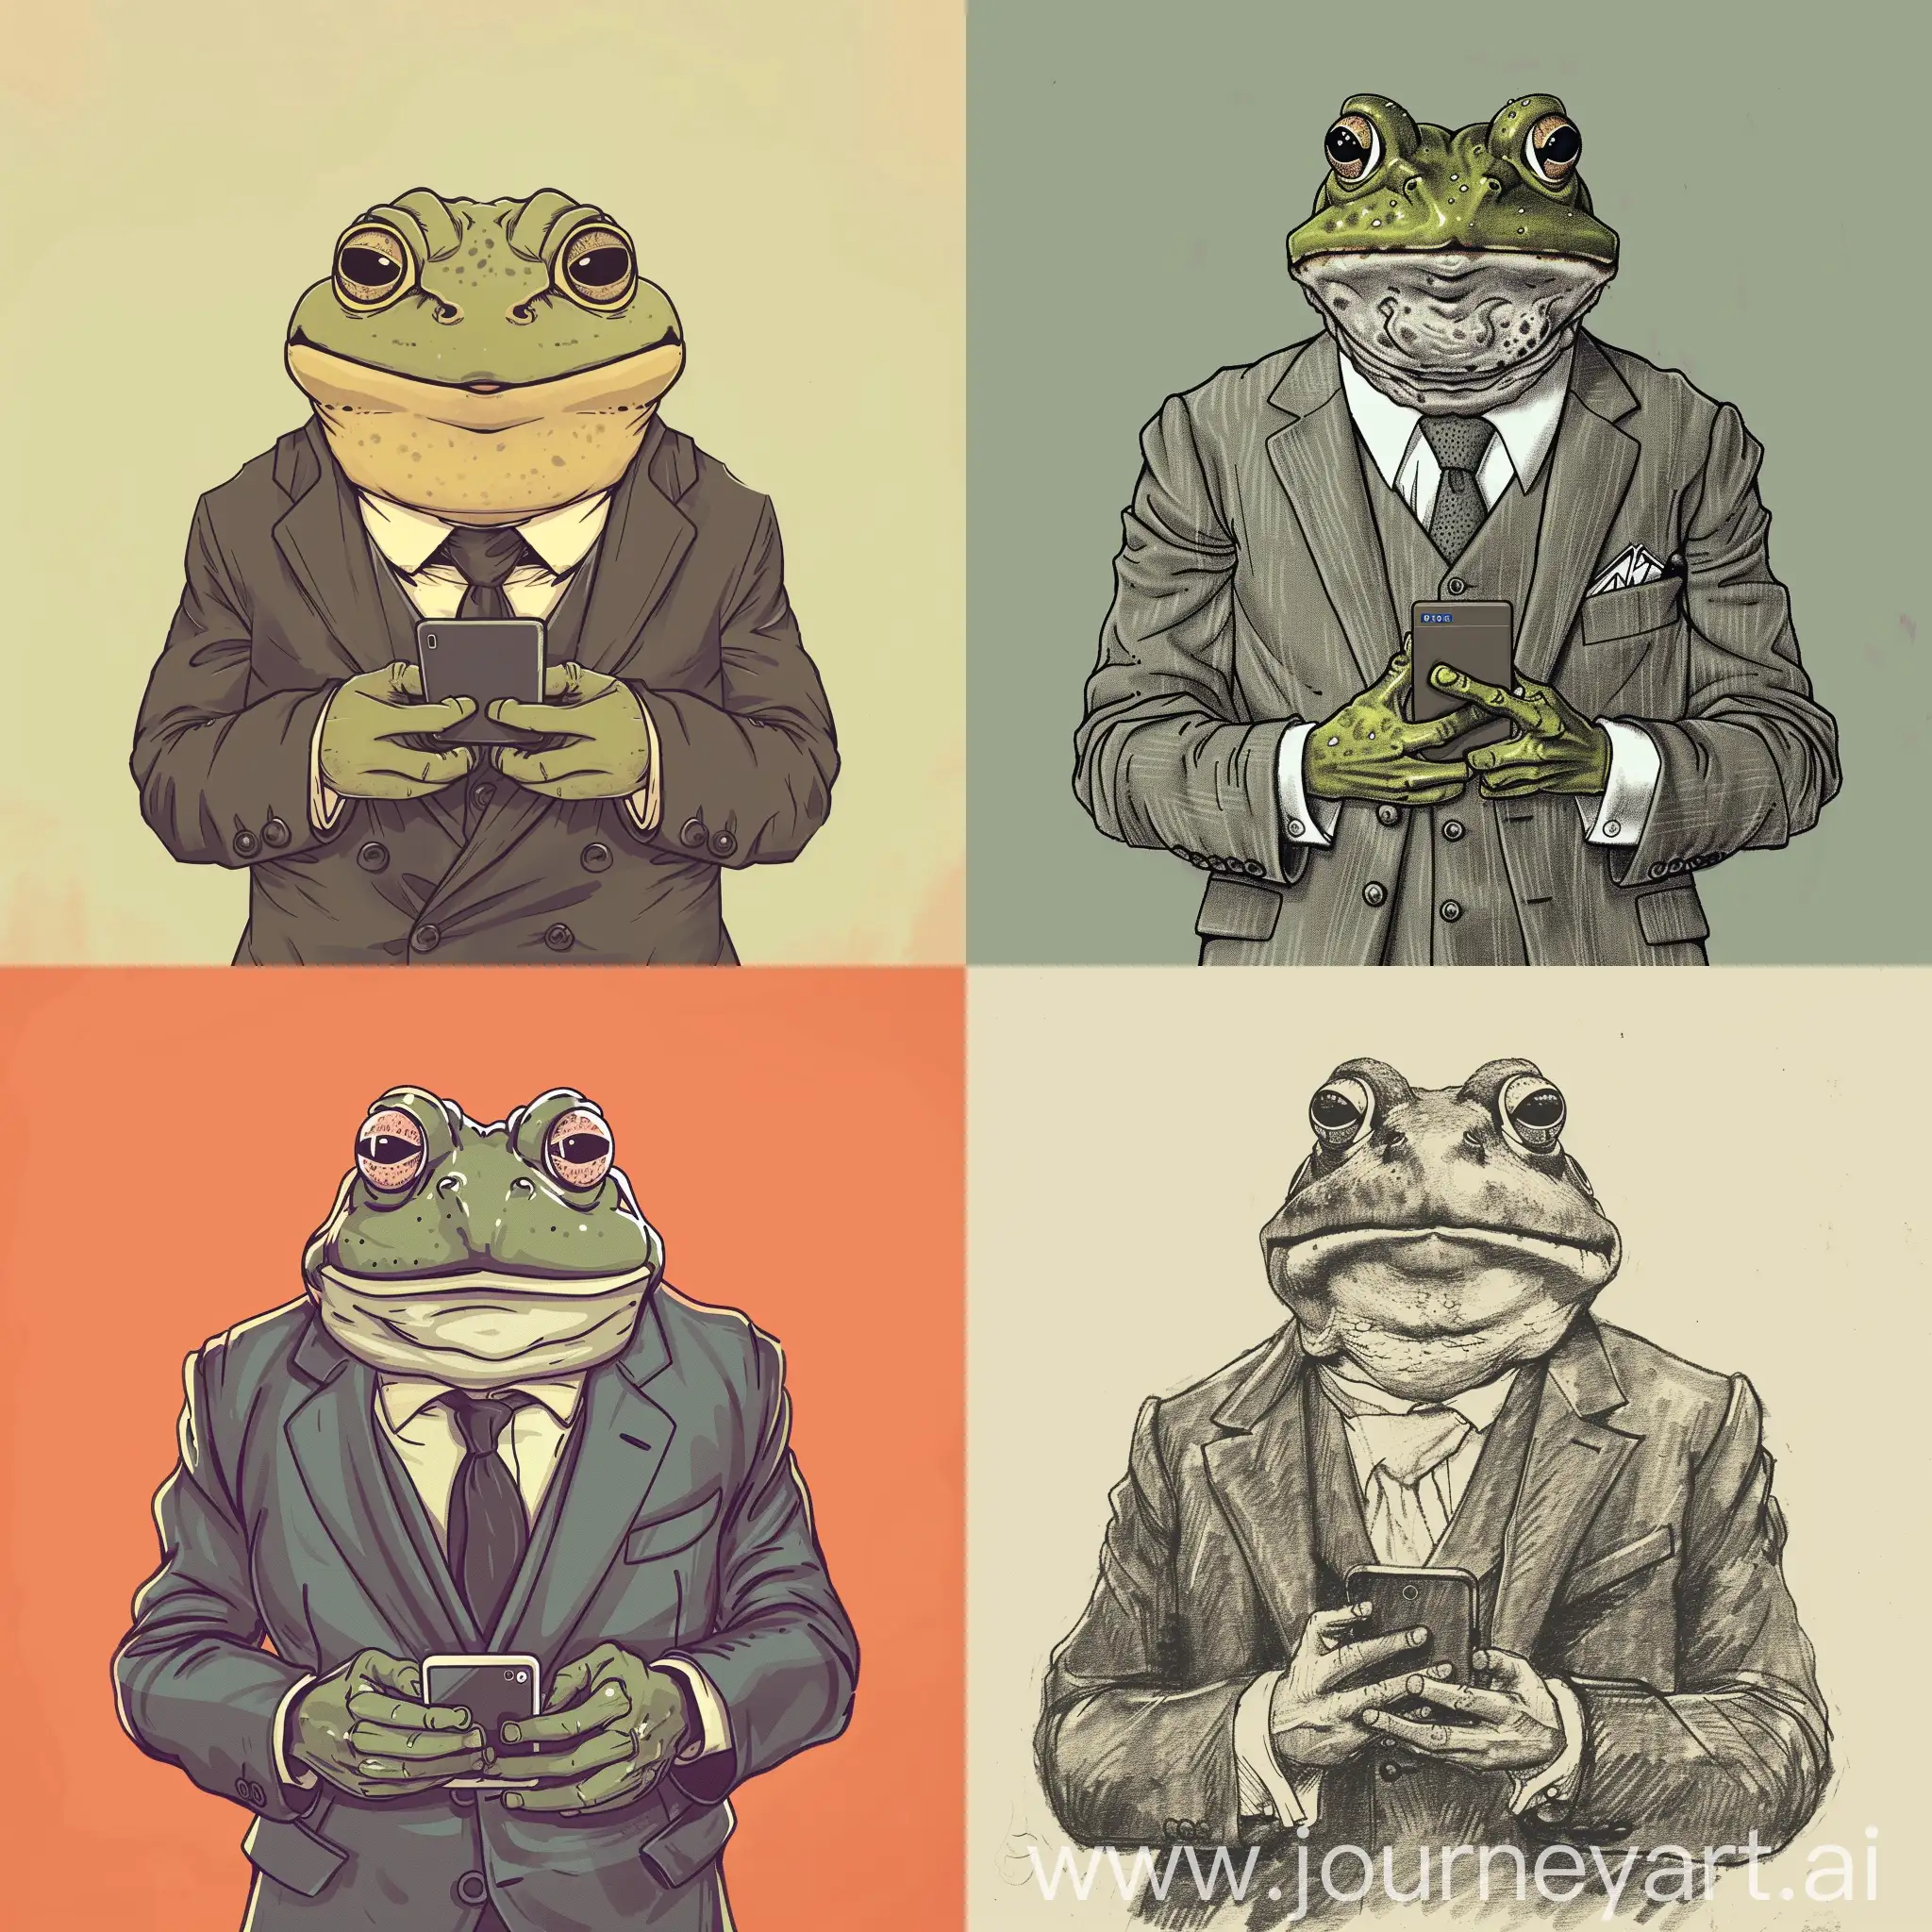 Draw a PEPE frog in the image of Andrew Tate. The frog should be dressed in a strict suit, have a serious expression on his face and hold a smartphone in his hands